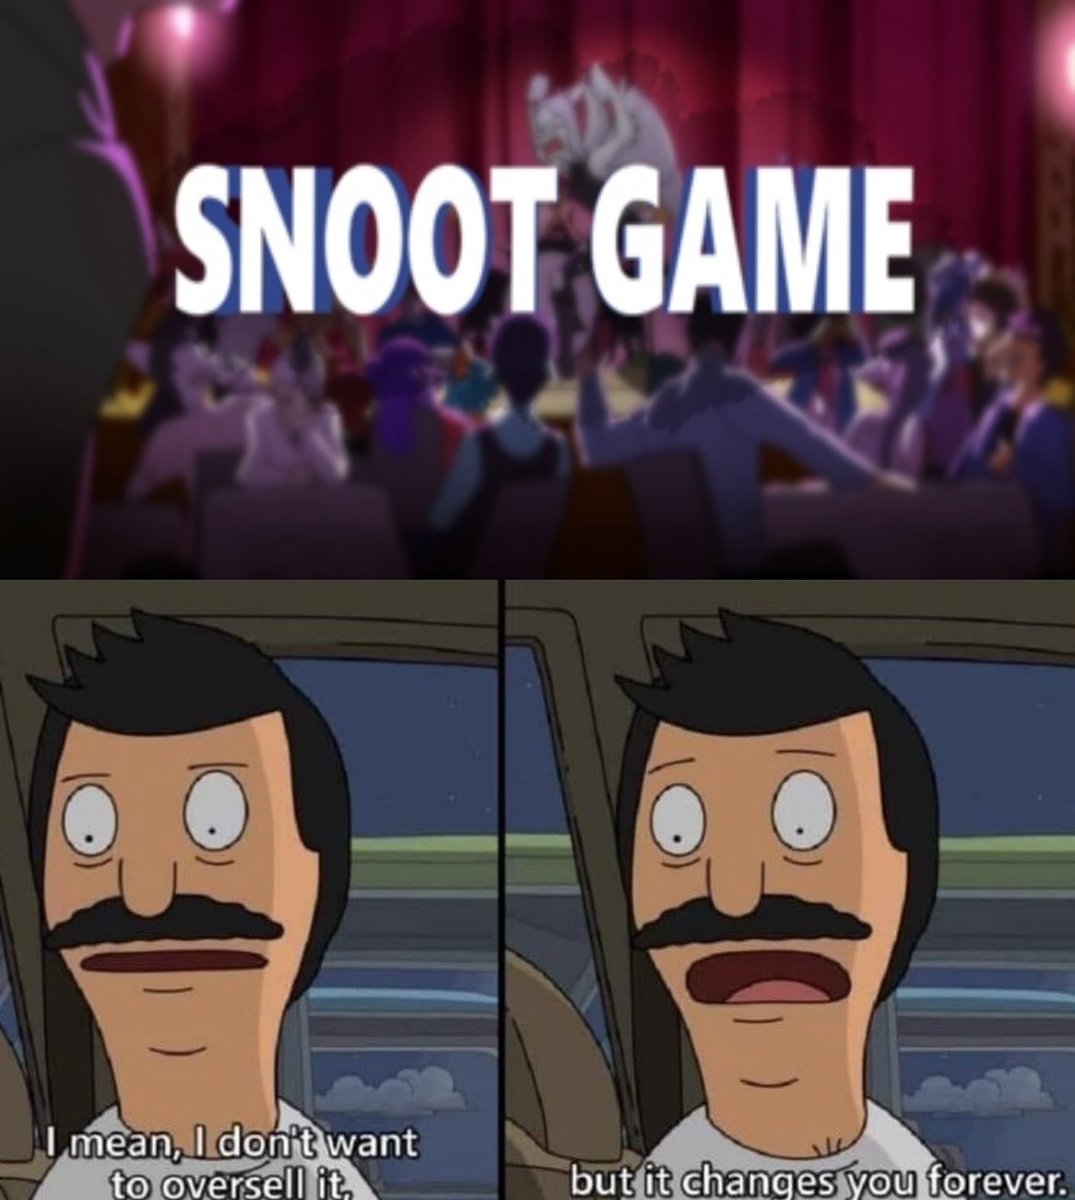 #snootgame in a nutshell